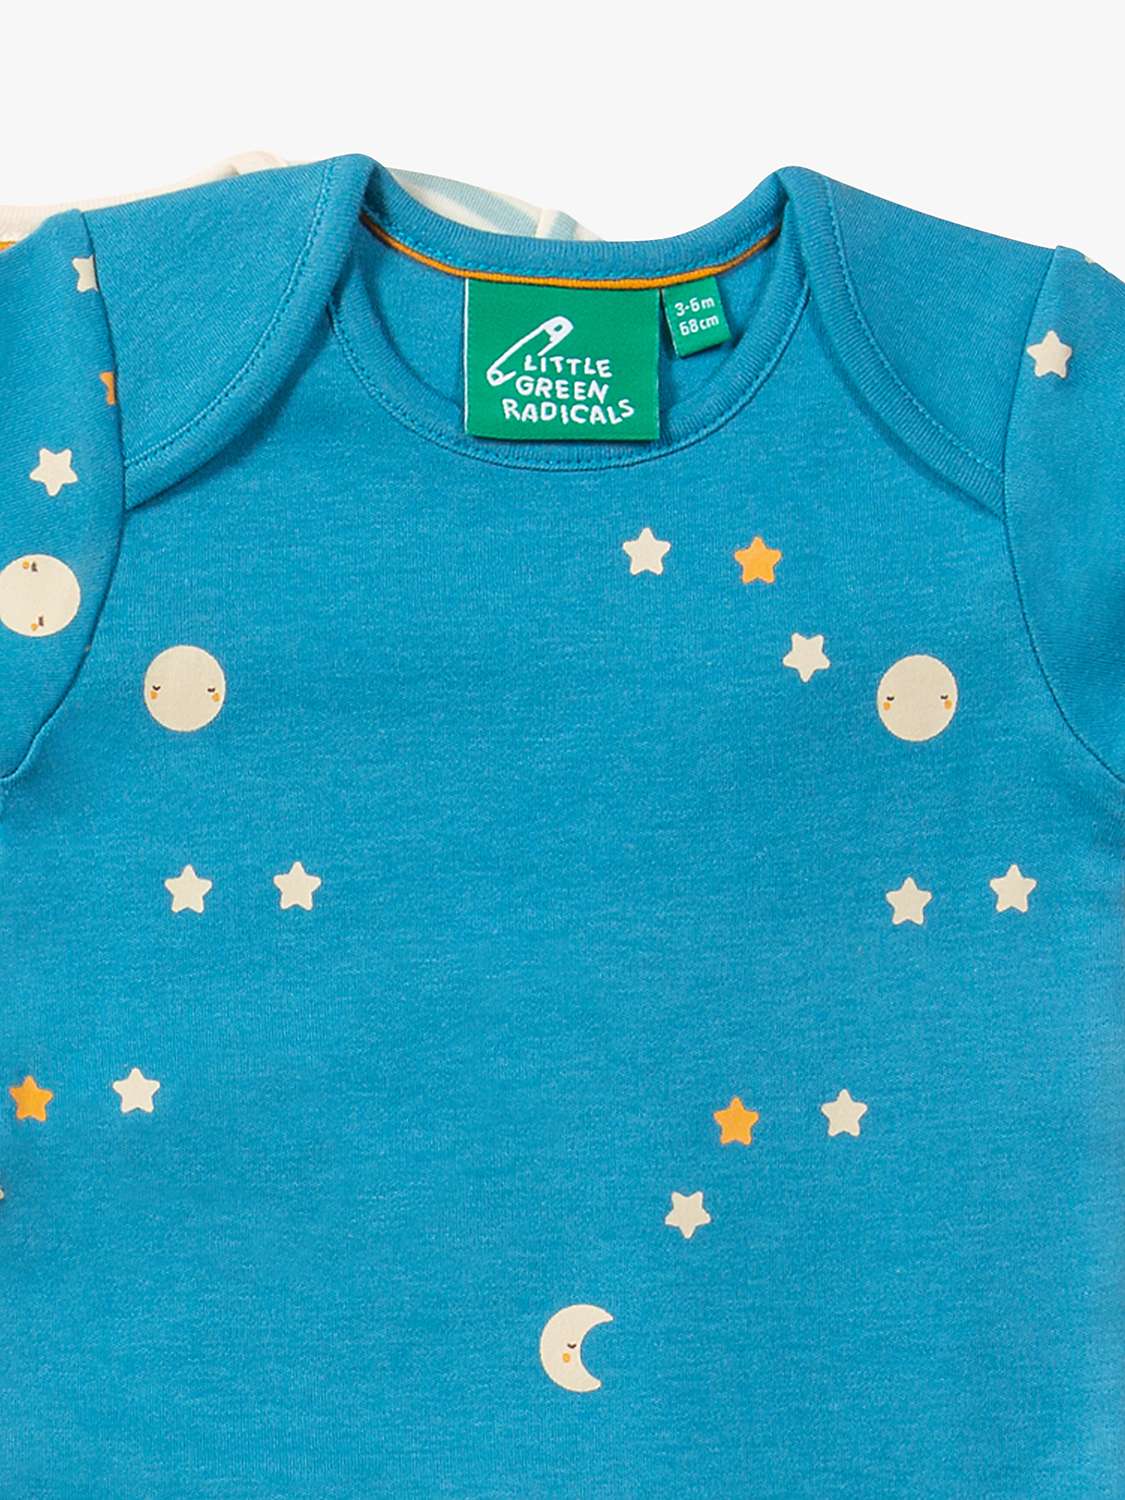 Buy Little Green Radicals Baby Organic Cotton Dawn Bodysuits, Pack of 2, Multi Online at johnlewis.com